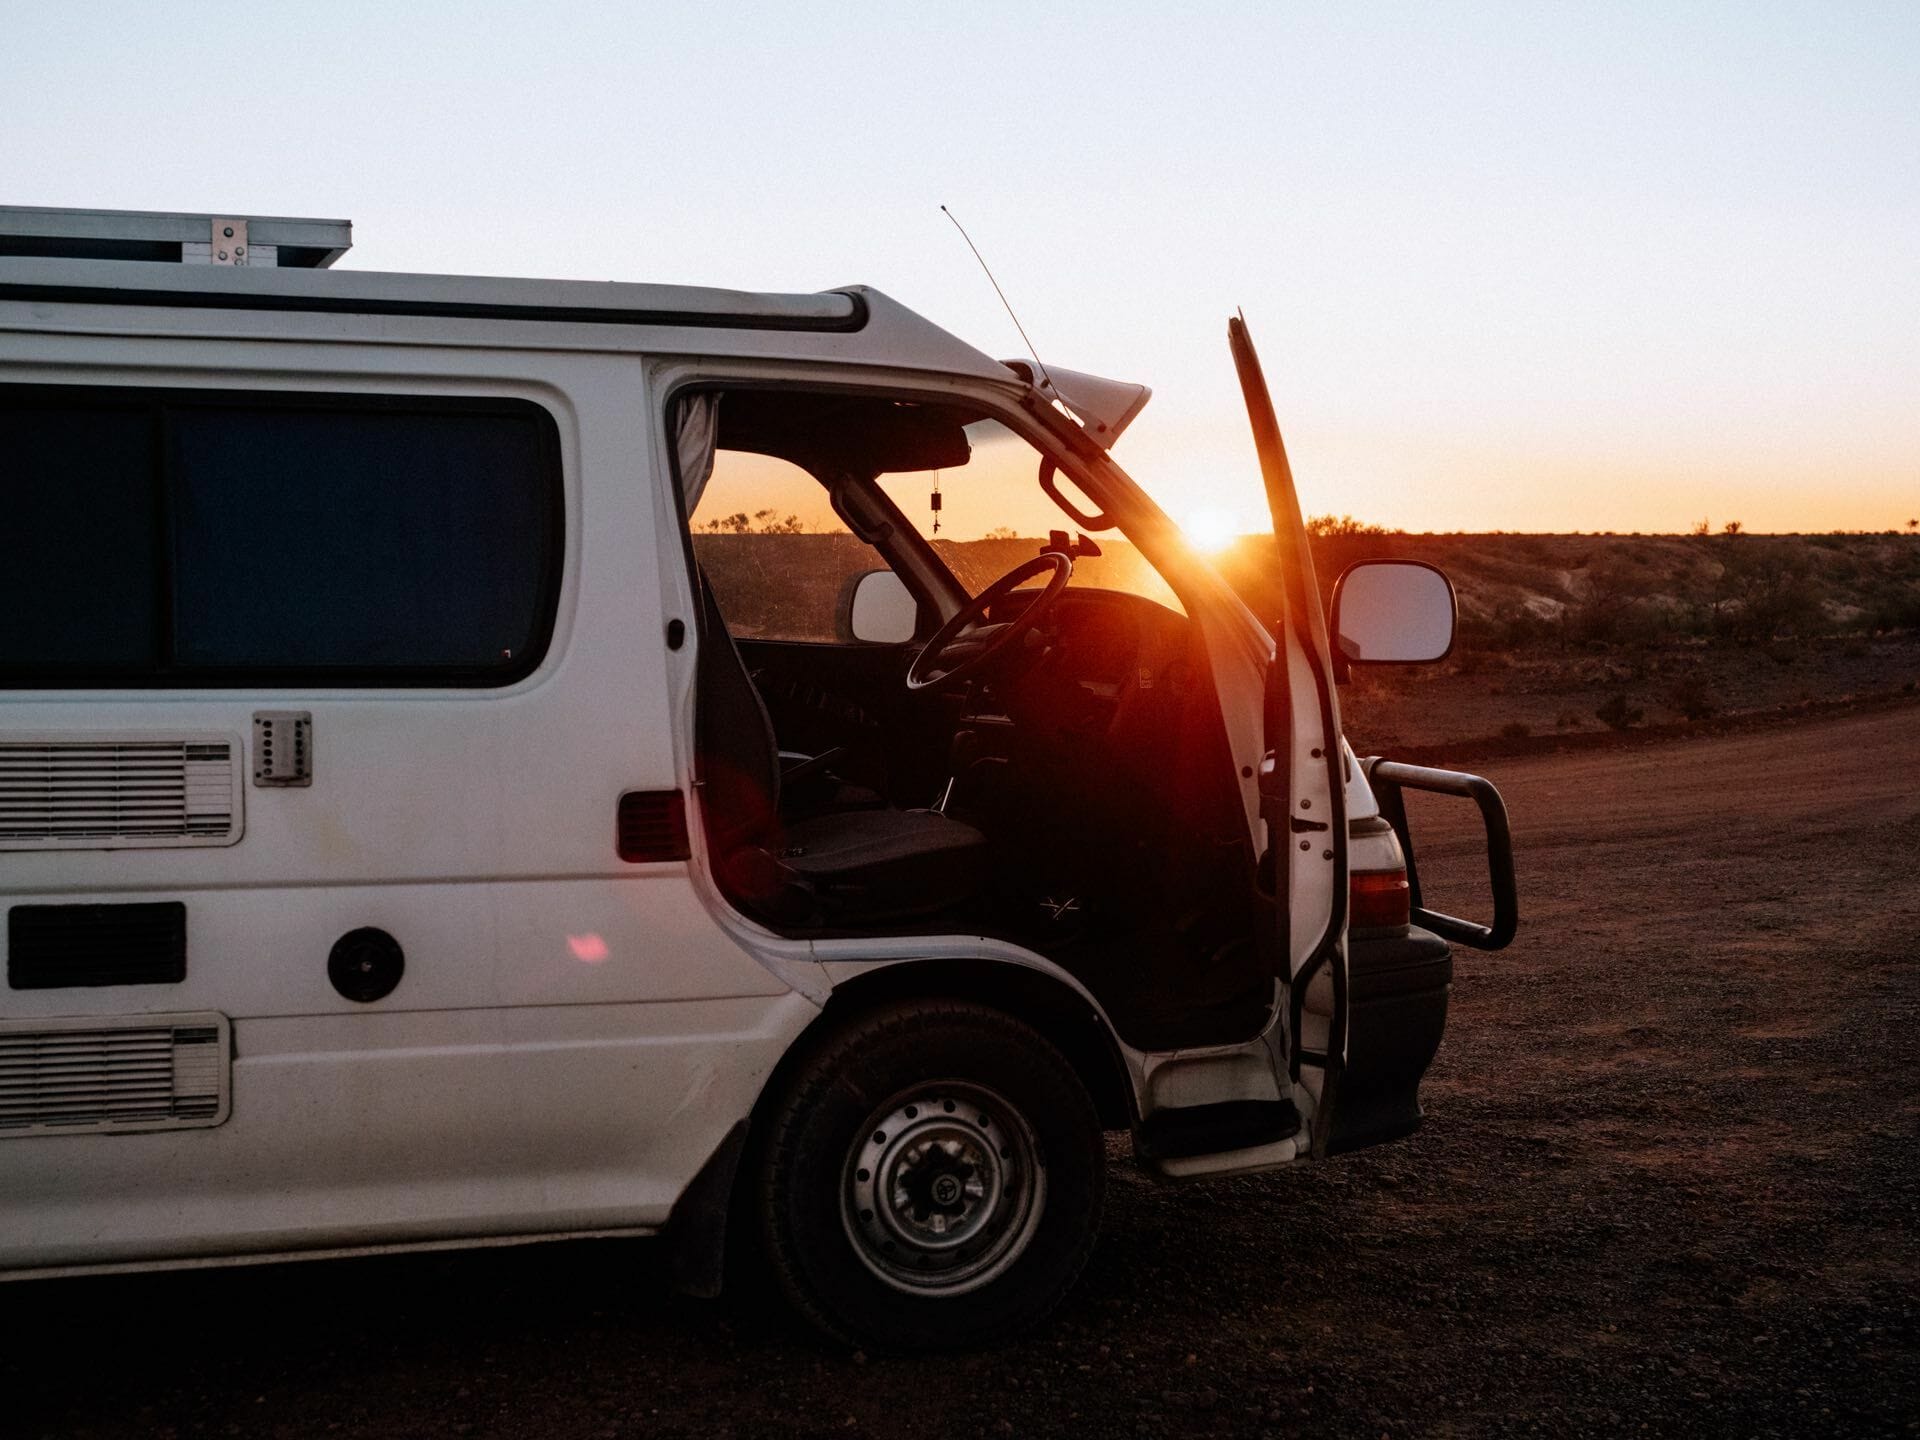 Sunset in outback Australia, What I’ve Learnt From 6 Months of Full Time #Vanlife, shot by Elisha Donkin, outback, australia, road trip, lap, van, vanlife